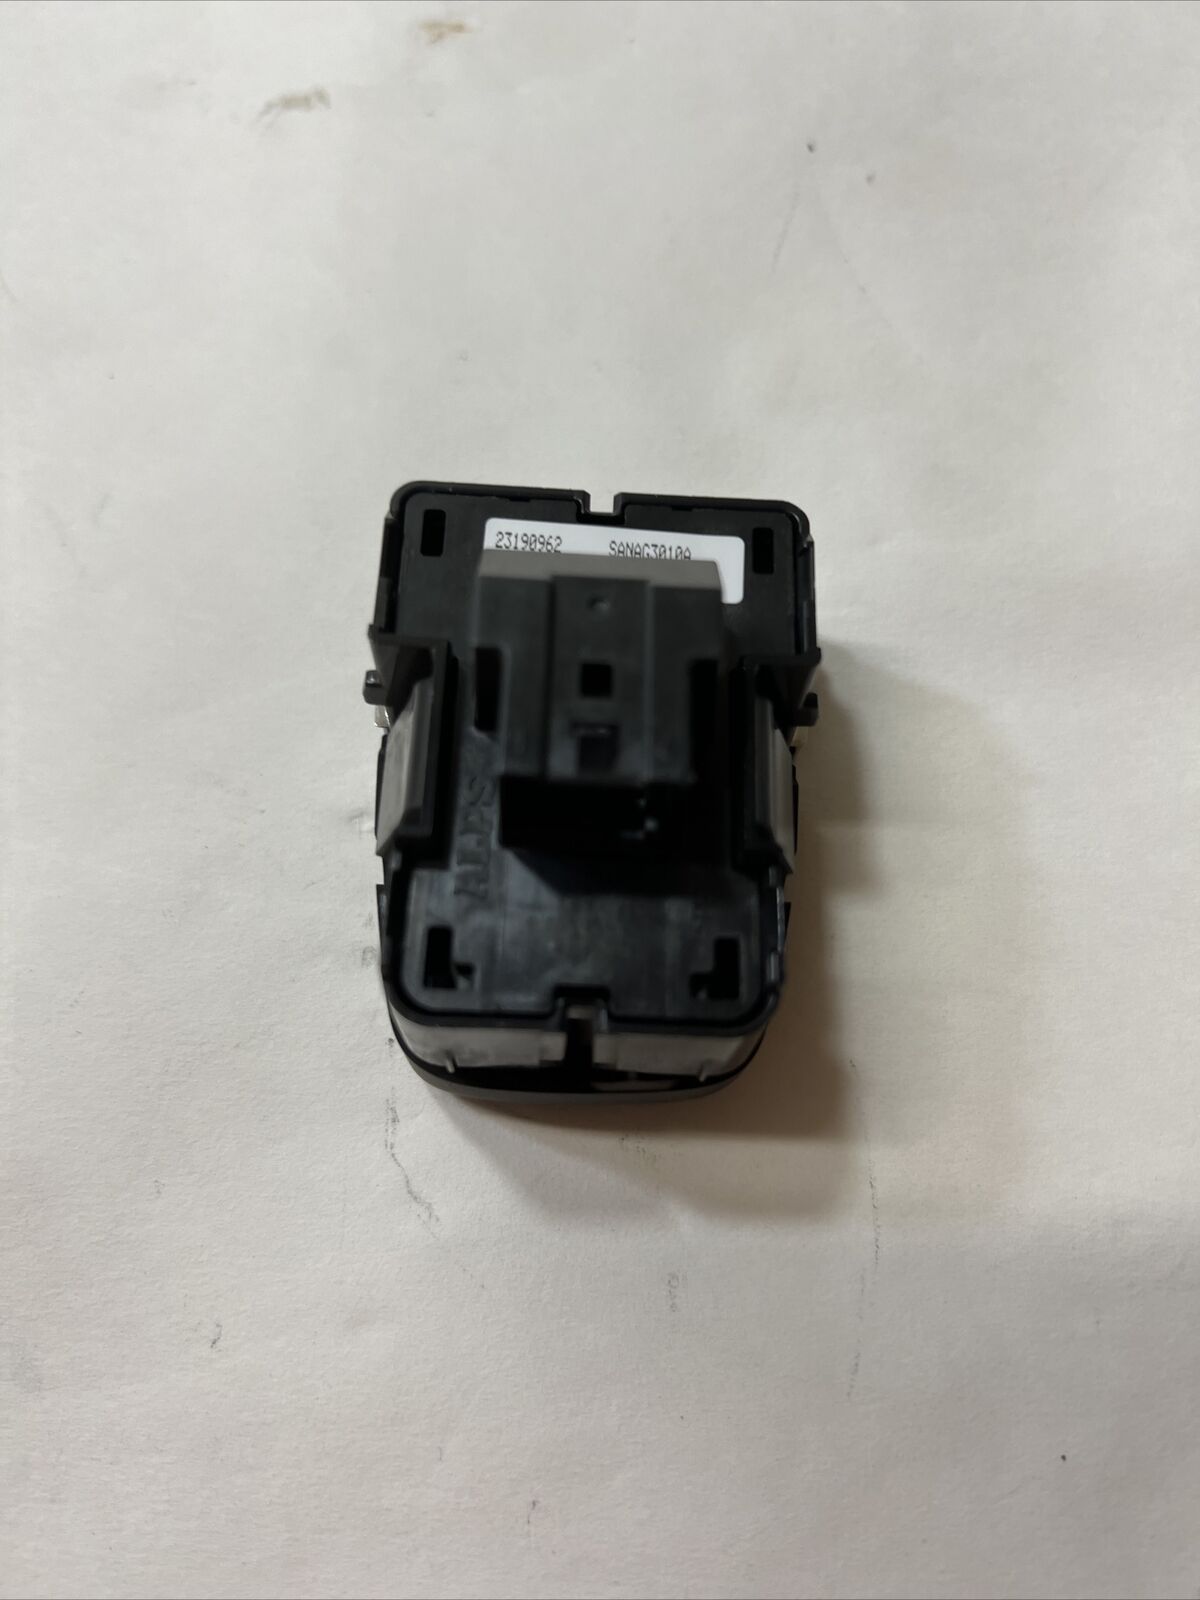 New OEM GM Cadillac CTS Center Console-Stab Cntl Switch 2014-2019 23190962